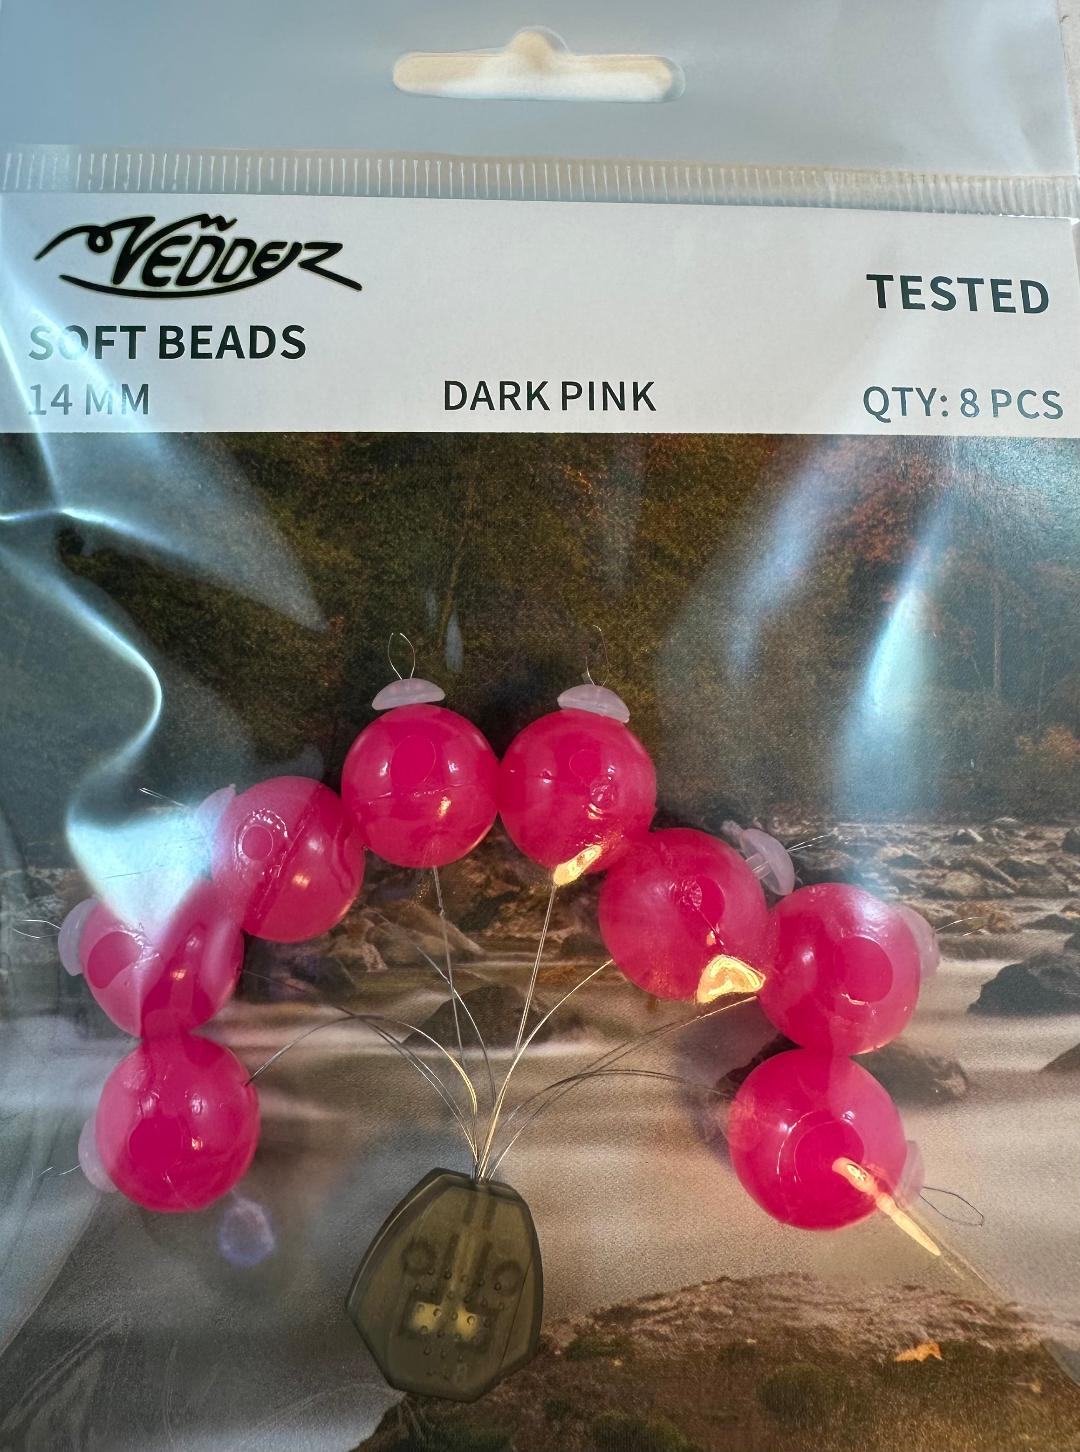 VSB-DP 14 Vedder 14 mm Dark Pink Soft Beads x 8 with Stoppers x 8